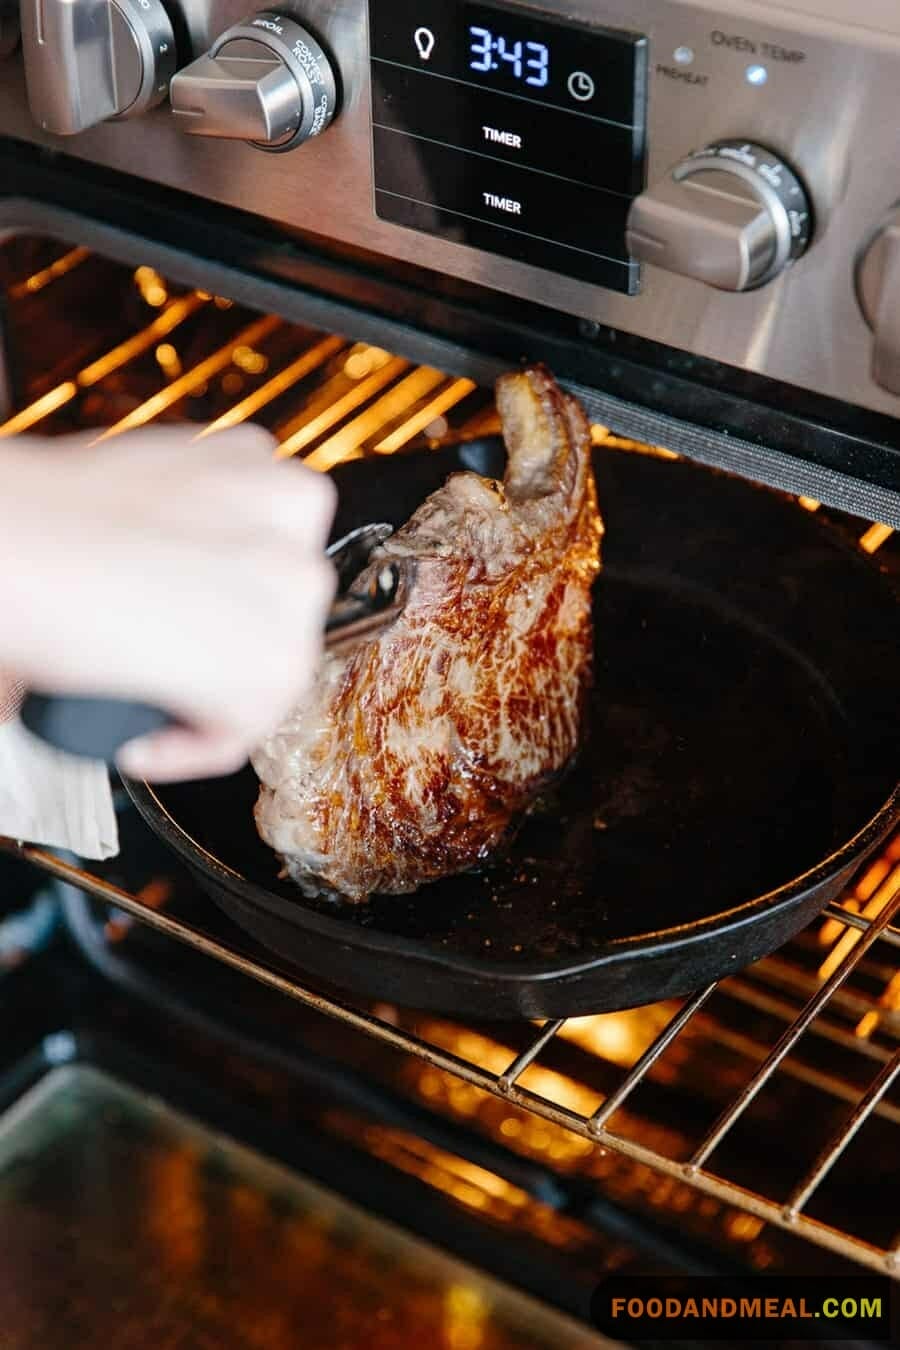 How To Broil In An Oven Without A Broiler